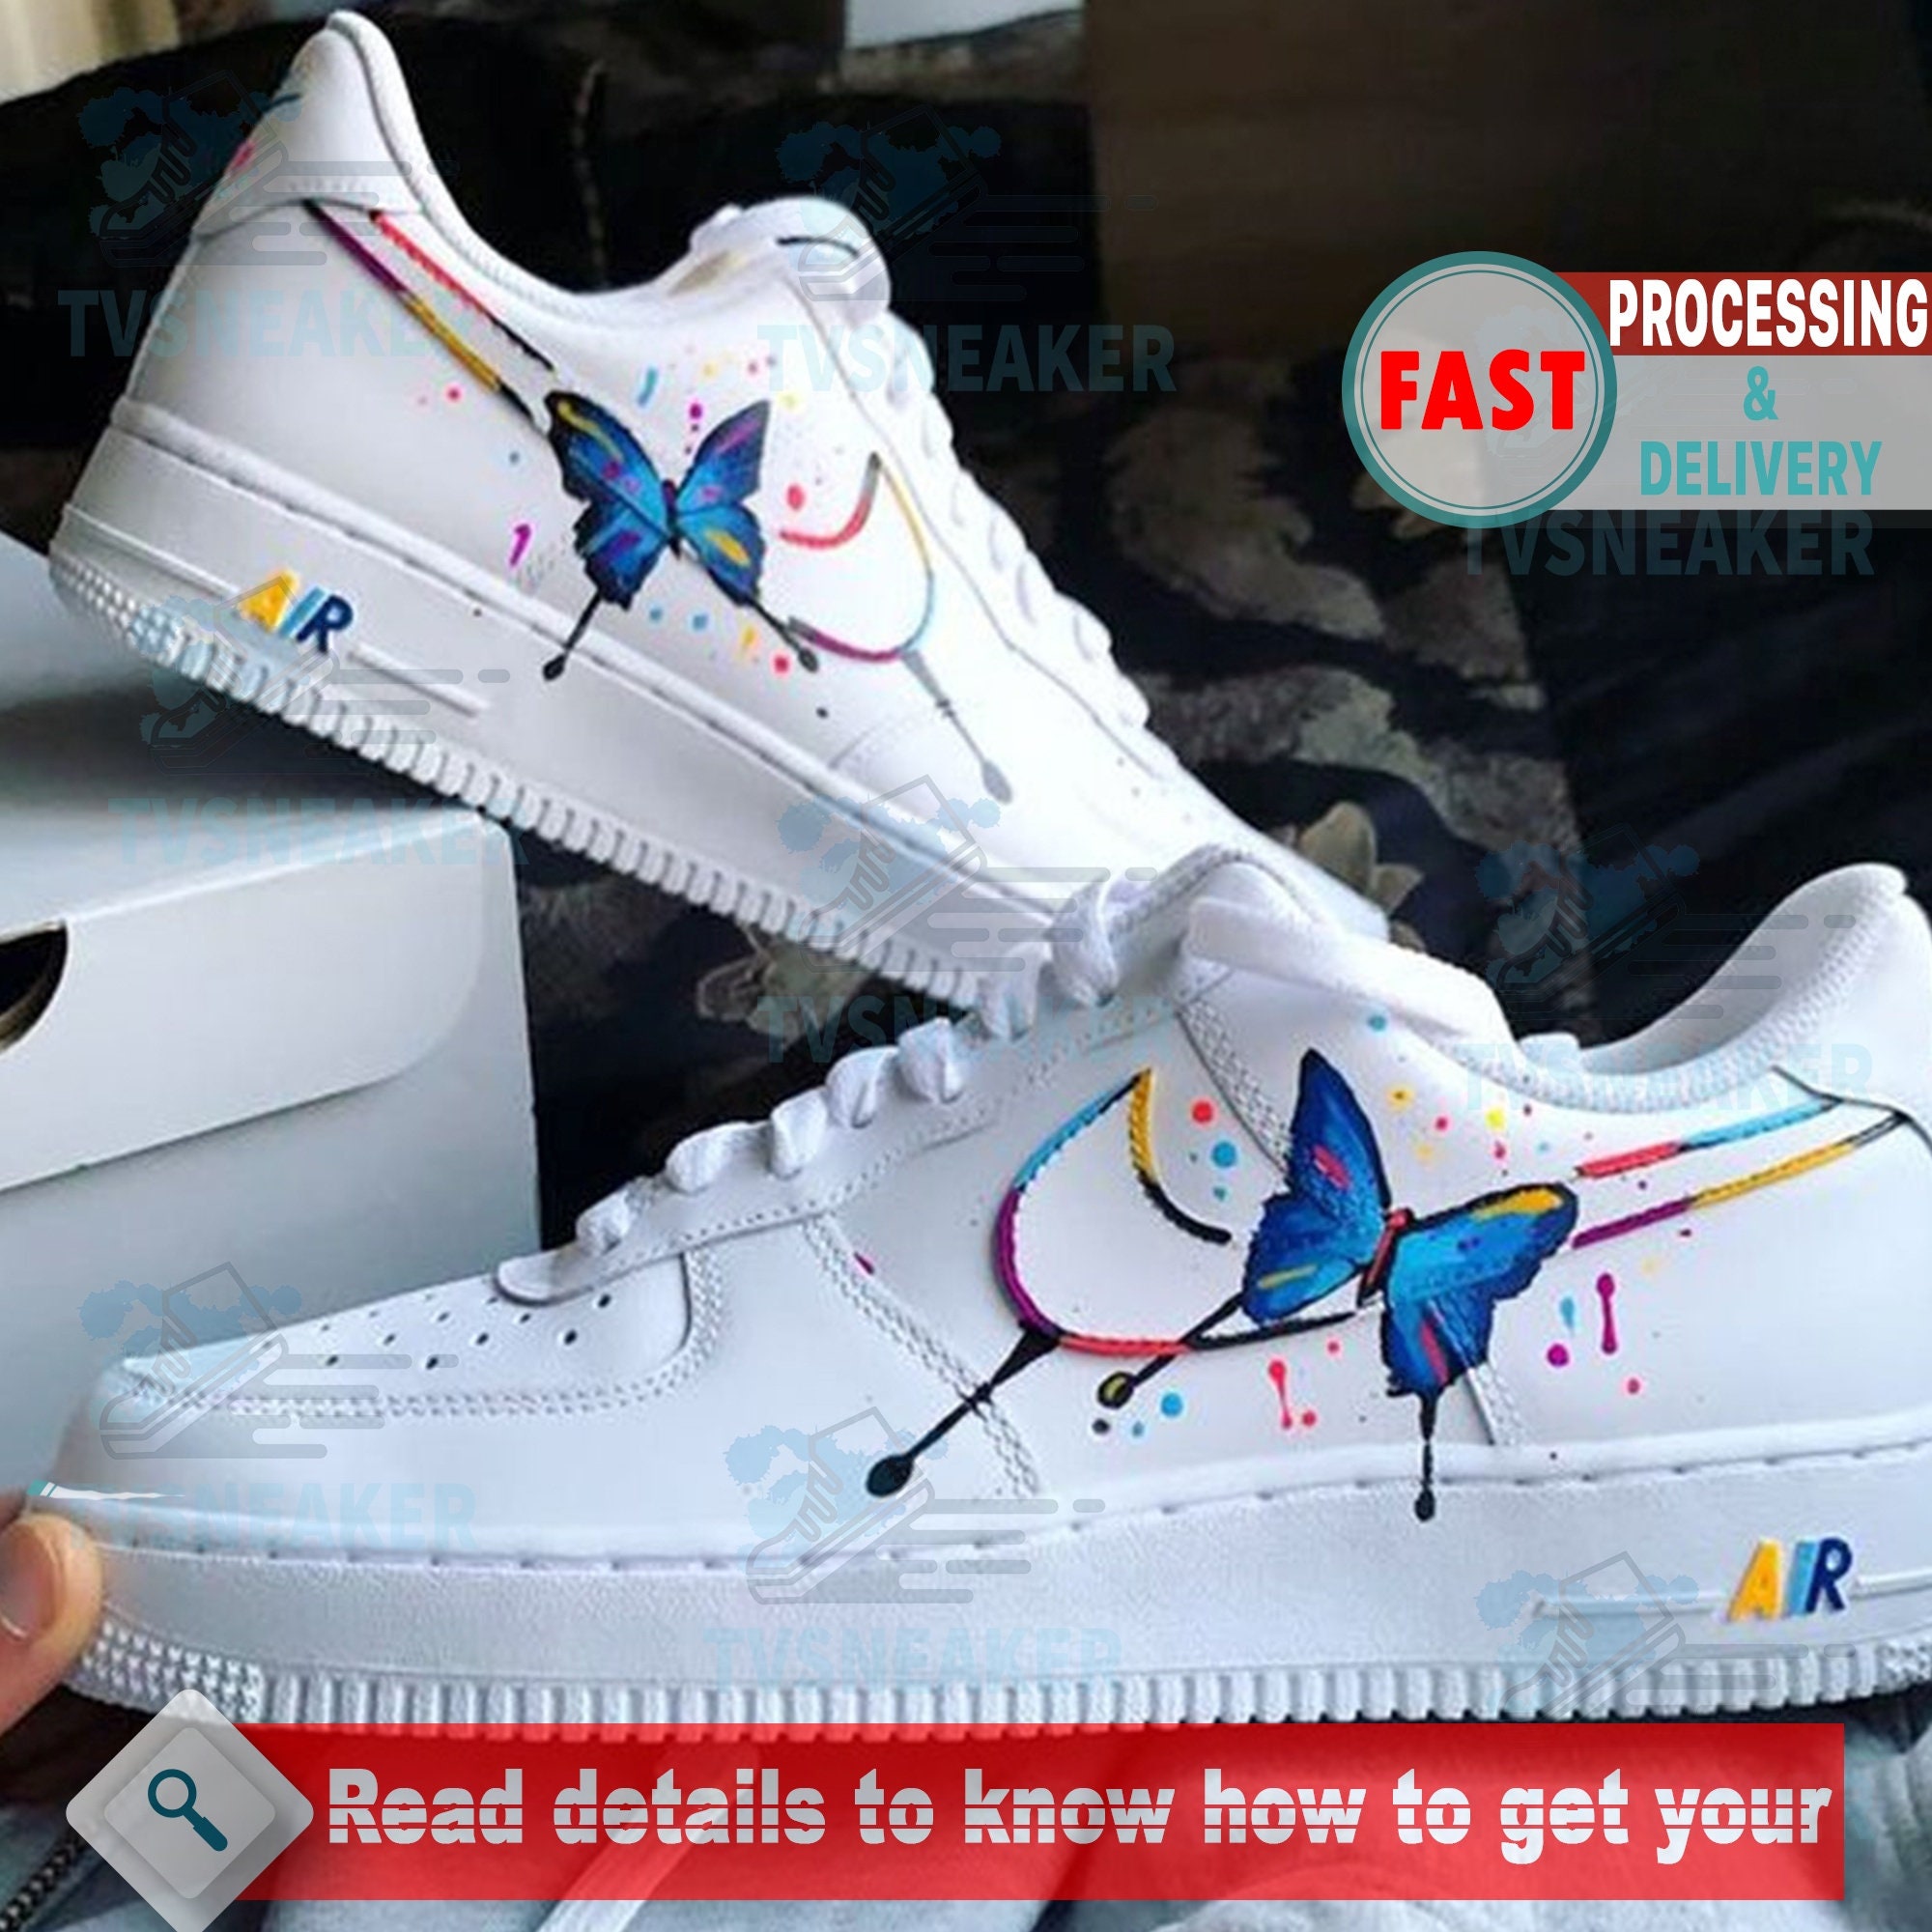 Buy Air Force 1 Butterfly Blue Online In India -  India